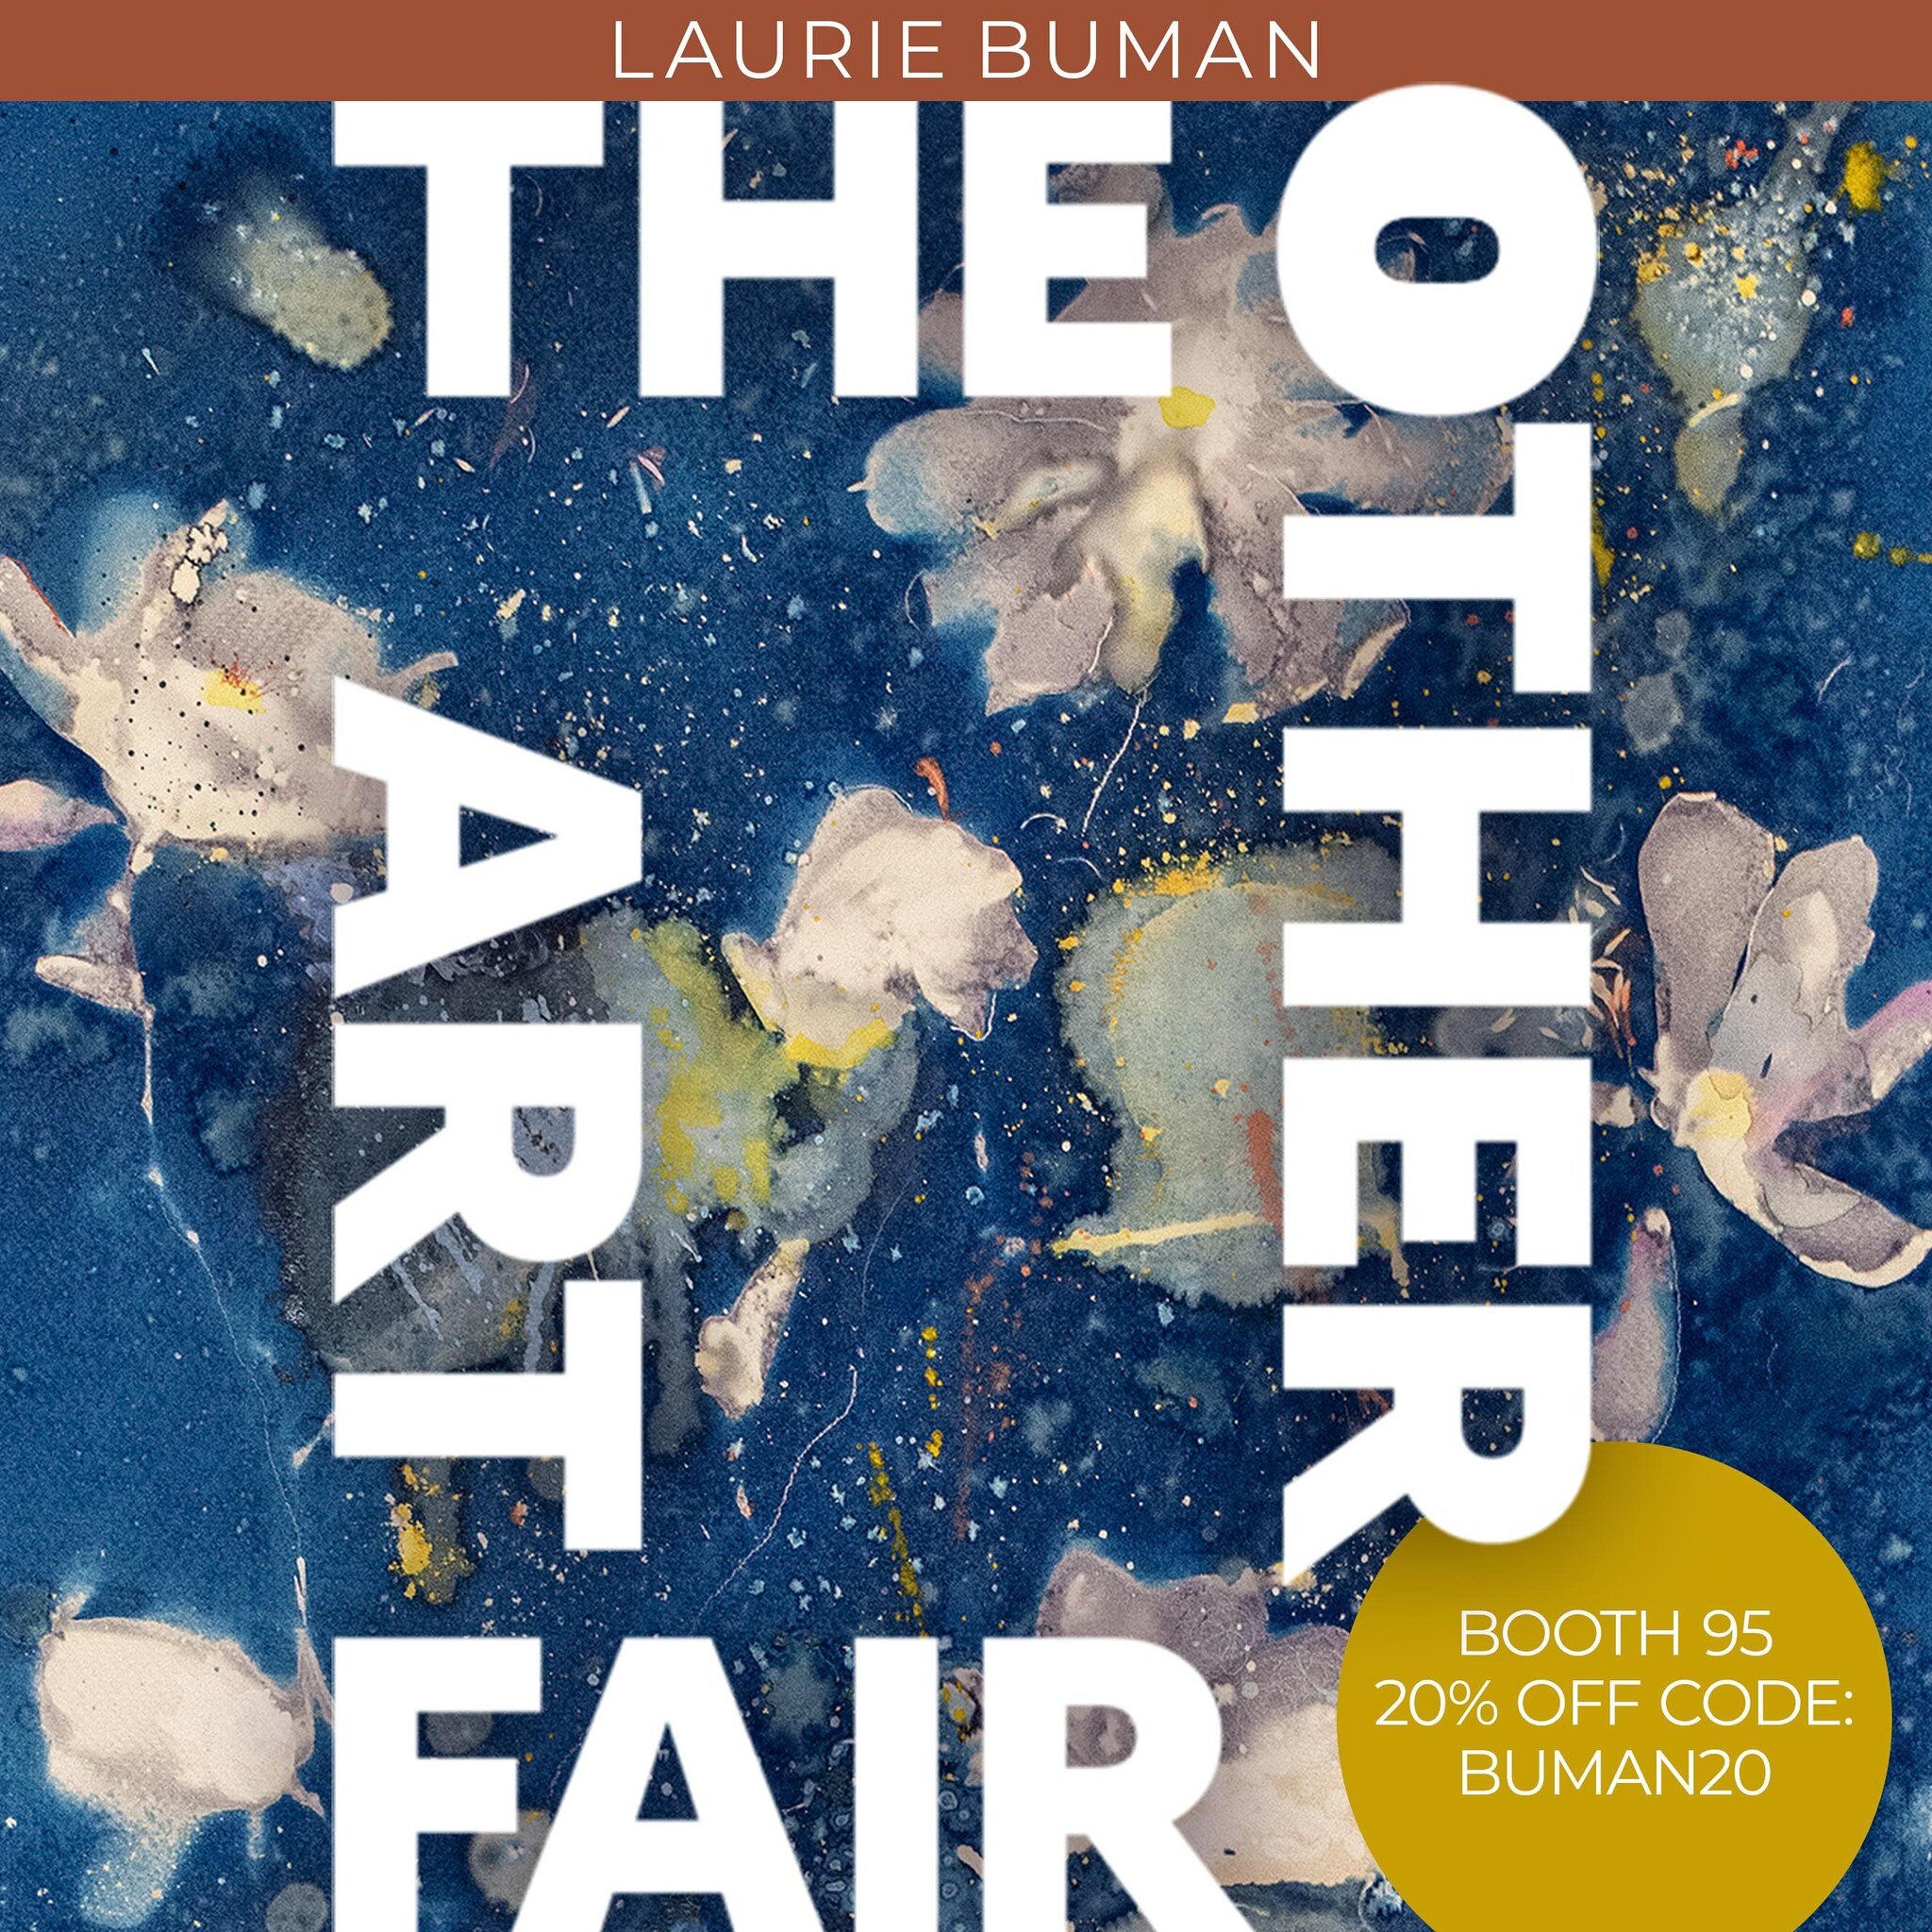 Only 4 days away&mdash;The Other Art Fair Chicago! Looking forward to sharing new work! Come visit me at Booth #95. Tickets 20% off with code: BUMAN20

theotherartfair.com/chicago/
⁠
April 11 &ndash; 14&nbsp;@artifacteventschicago, the fair will feat